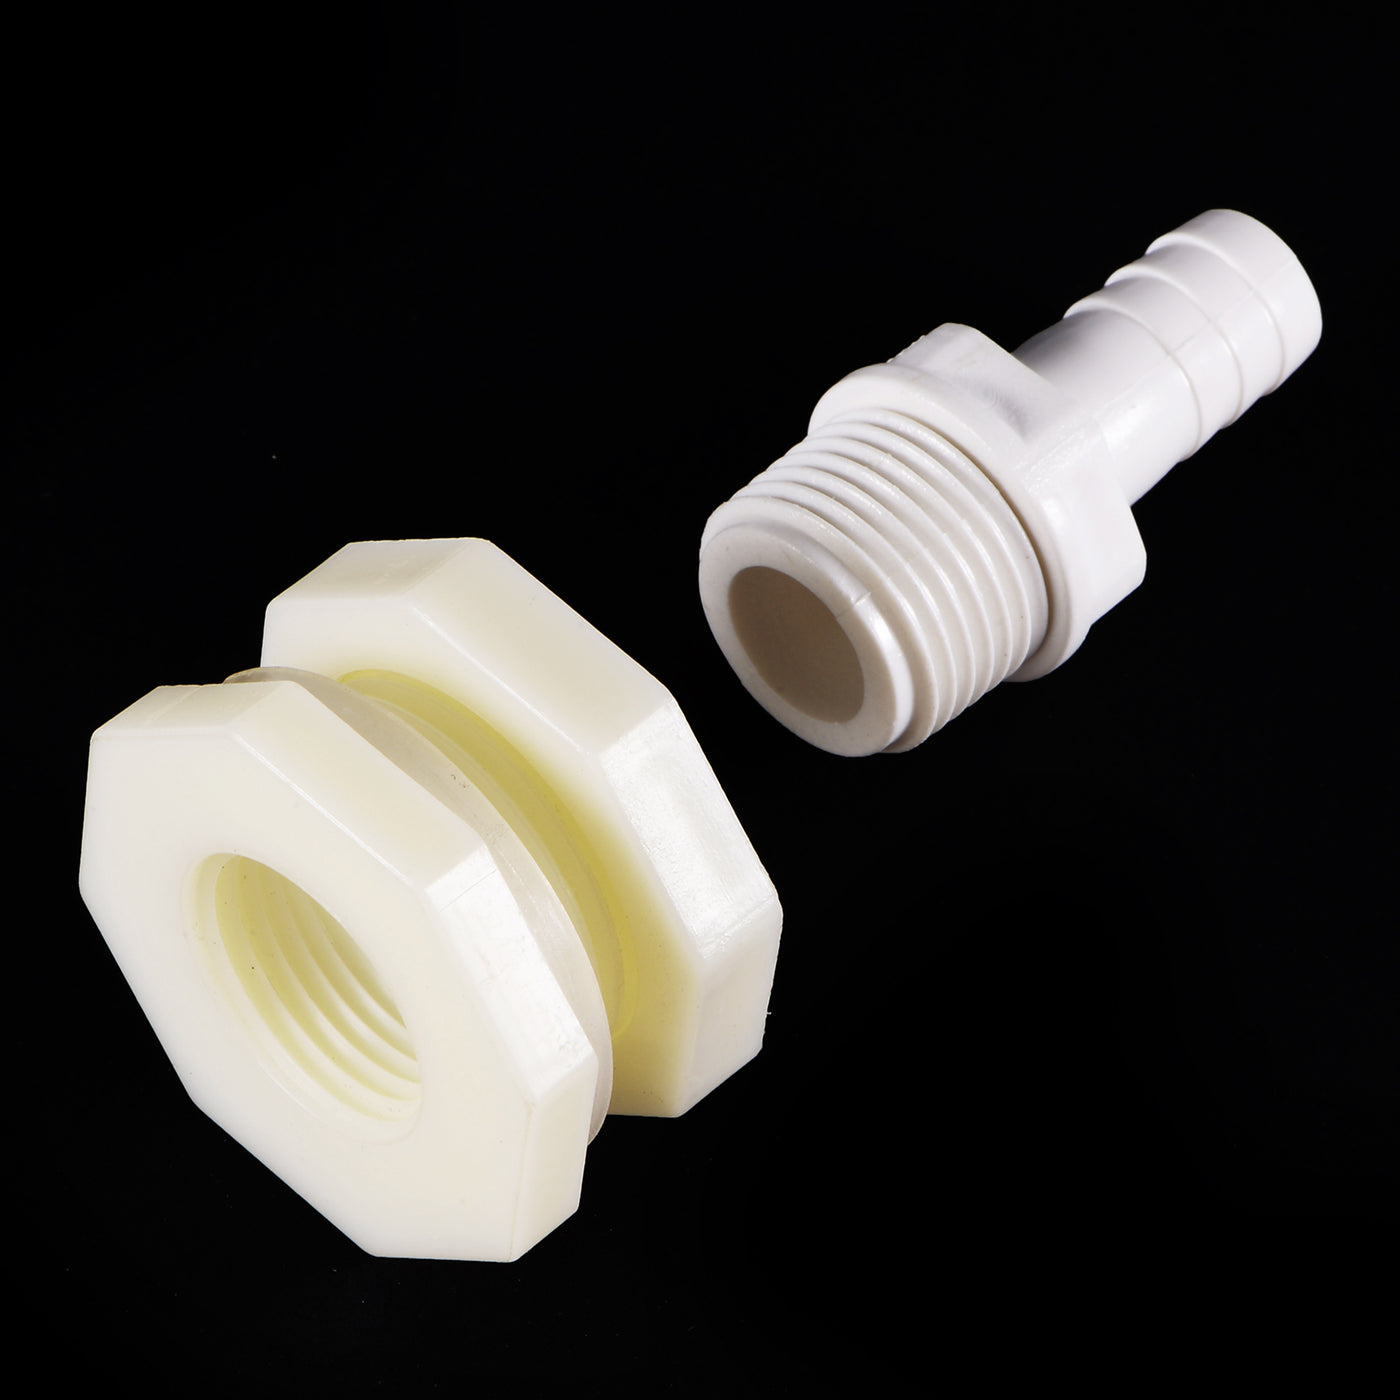 uxcell Uxcell Bulkhead Fitting Adapter 12mm Barbed x G1/2 Female ABS White for Aquariums, Water Tanks, Tubs, Pools 2Pcs